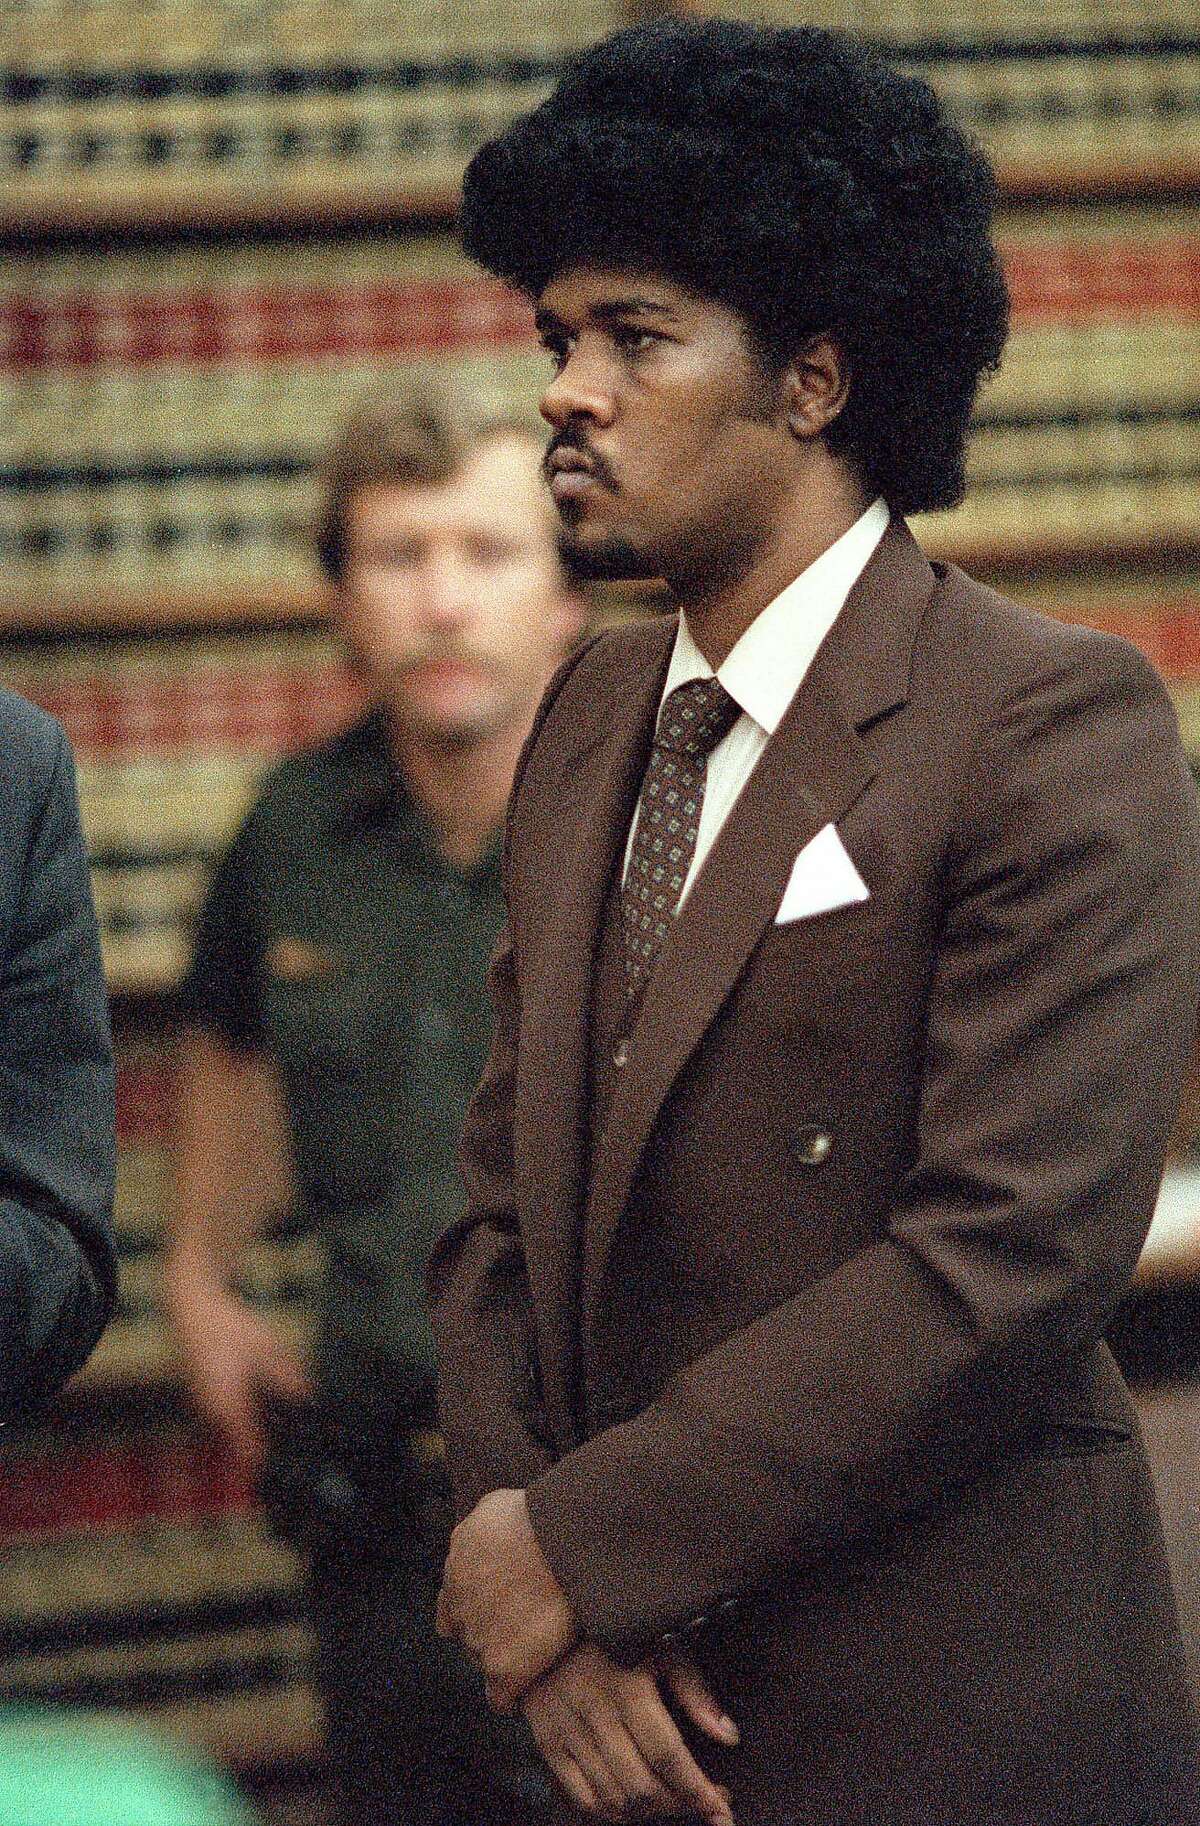 **FOR USE AS DESIRED WITH COOPER EXECUTION STORIES-FILE ** Convicted murder Kevin Cooper stands before a San Diego judge in this May 1985 file photo when he was sentenced to death for the 1983 slayings of three Chino Hills, Calif, family members and a friend. Cooper is scheduled to die by lethal injection Tuesday, Feb. 10 in California's San Quentin prison. (AP Photo/San Diego Union Tribune, Dave Siccardi, File) Kevin Cooper, sentenced to die 12:01 a.m. Tuesday, was convicted of murdering four people in 1983. Ran on: 12-13-2010 Kevin Cooper during his sentencing hearing in 1985.